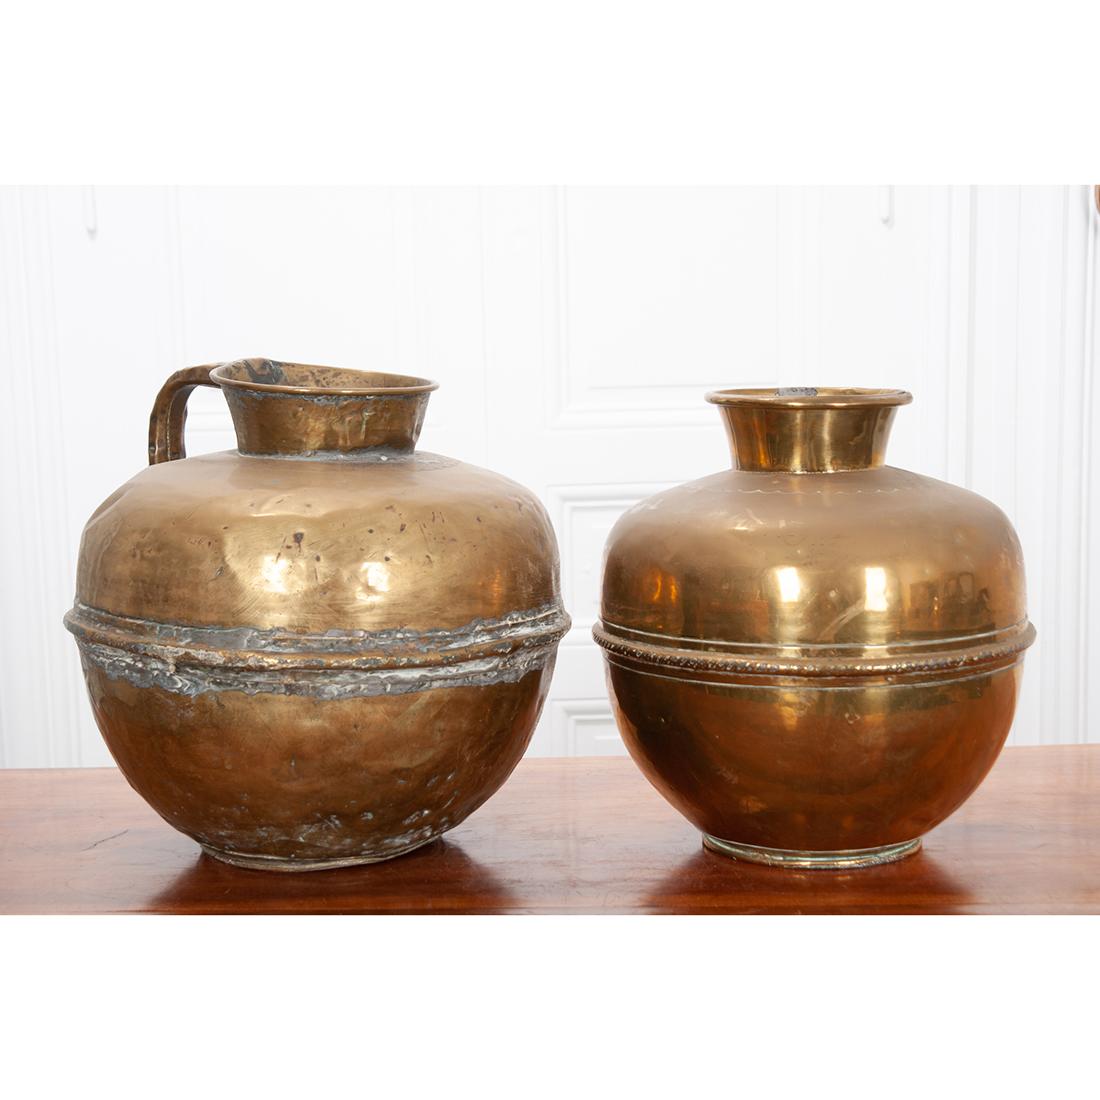 Originating from 19th century France, these would have been used to measure milk quantities in the cheese making process. They show wonderful handmade craftsmanship and were well used as is evident in the old repair work that is visible on the jugs,